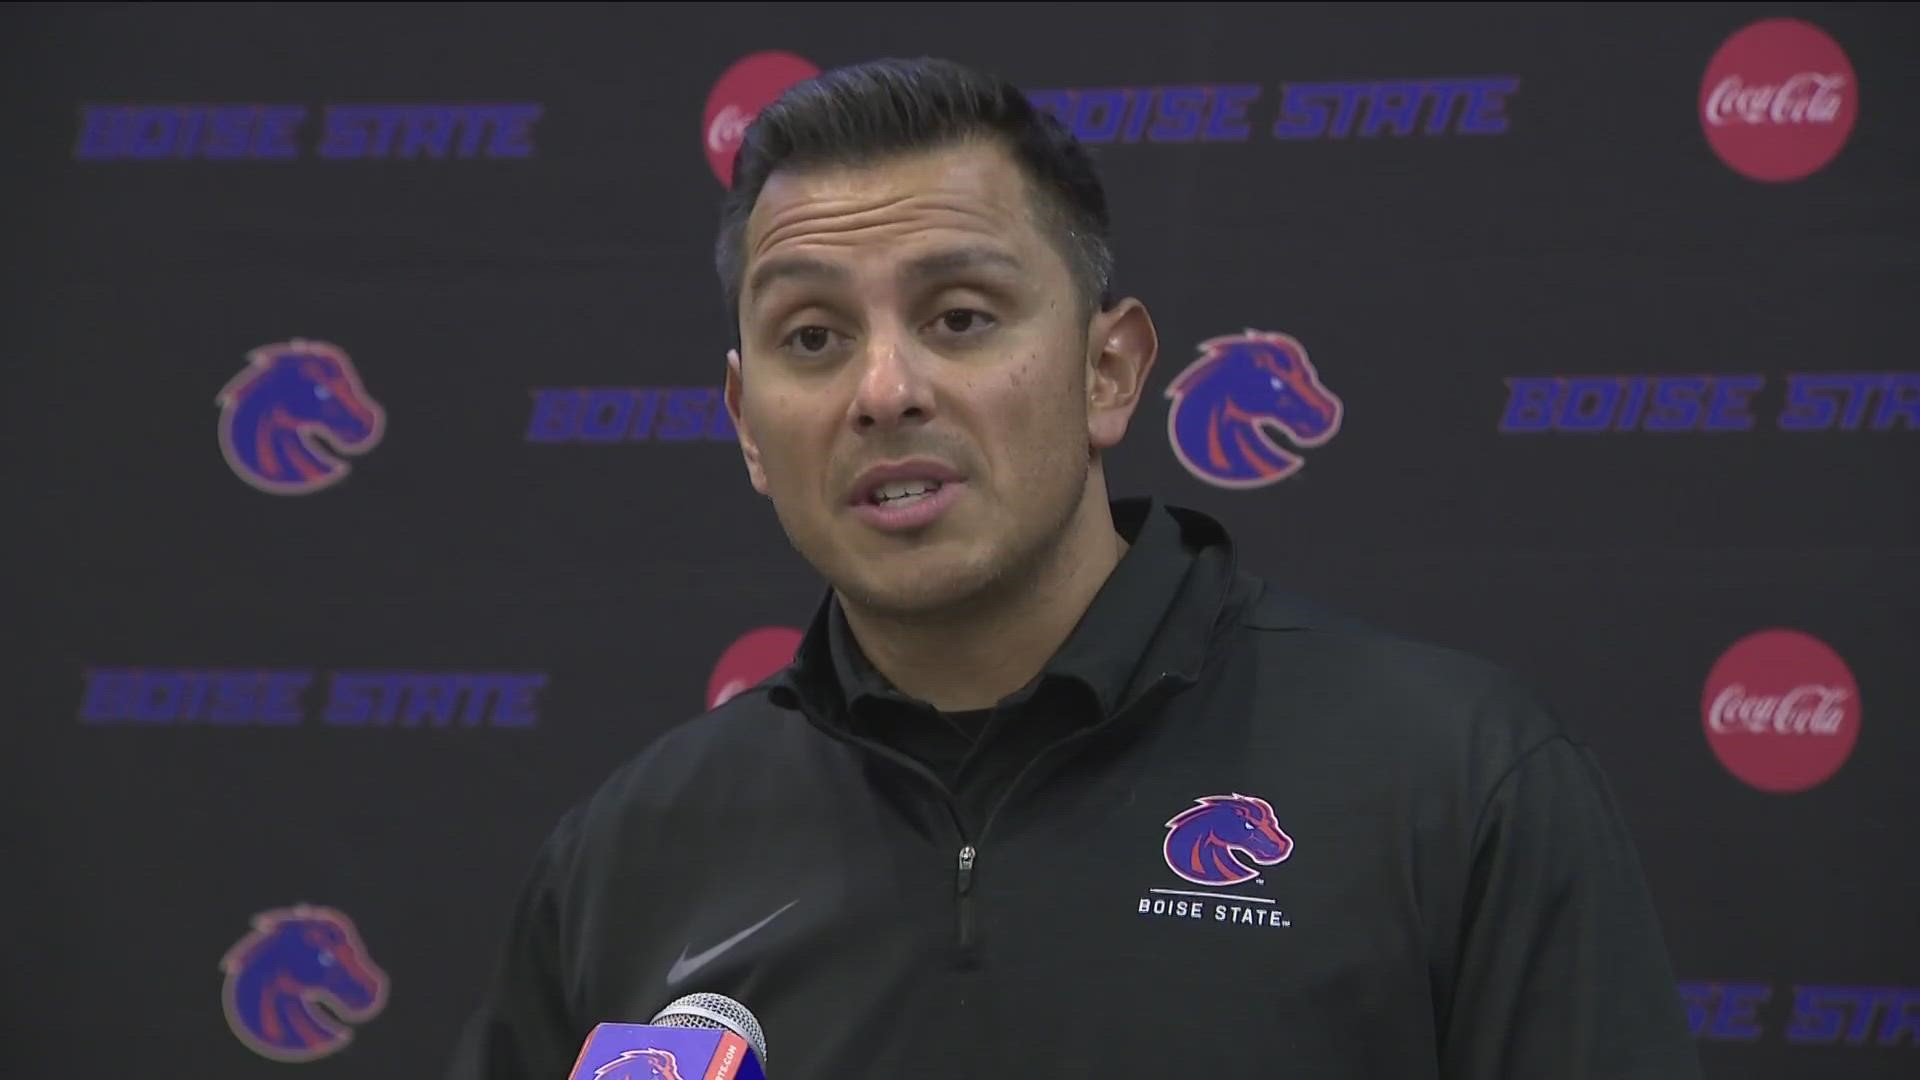 After signing 22 players last December, the Broncos added an additional 12 athletes Wednesday. Six of Boise State's latest signees are Idaho natives.